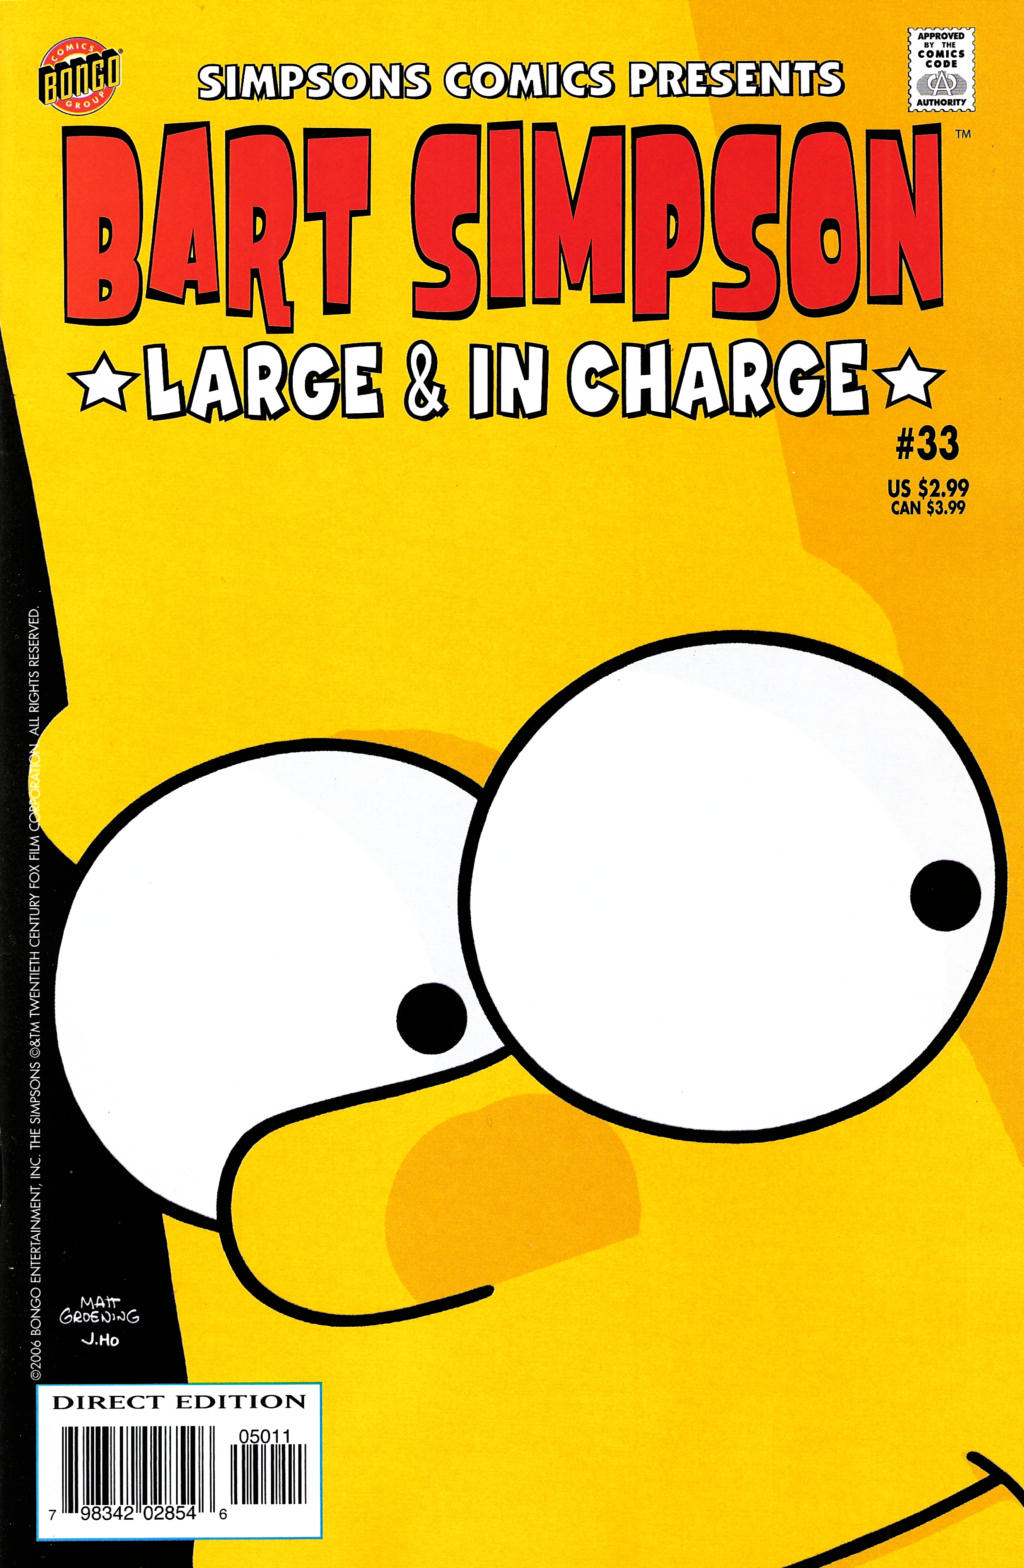 Read online Bart Simpson comic -  Issue #33 - 1